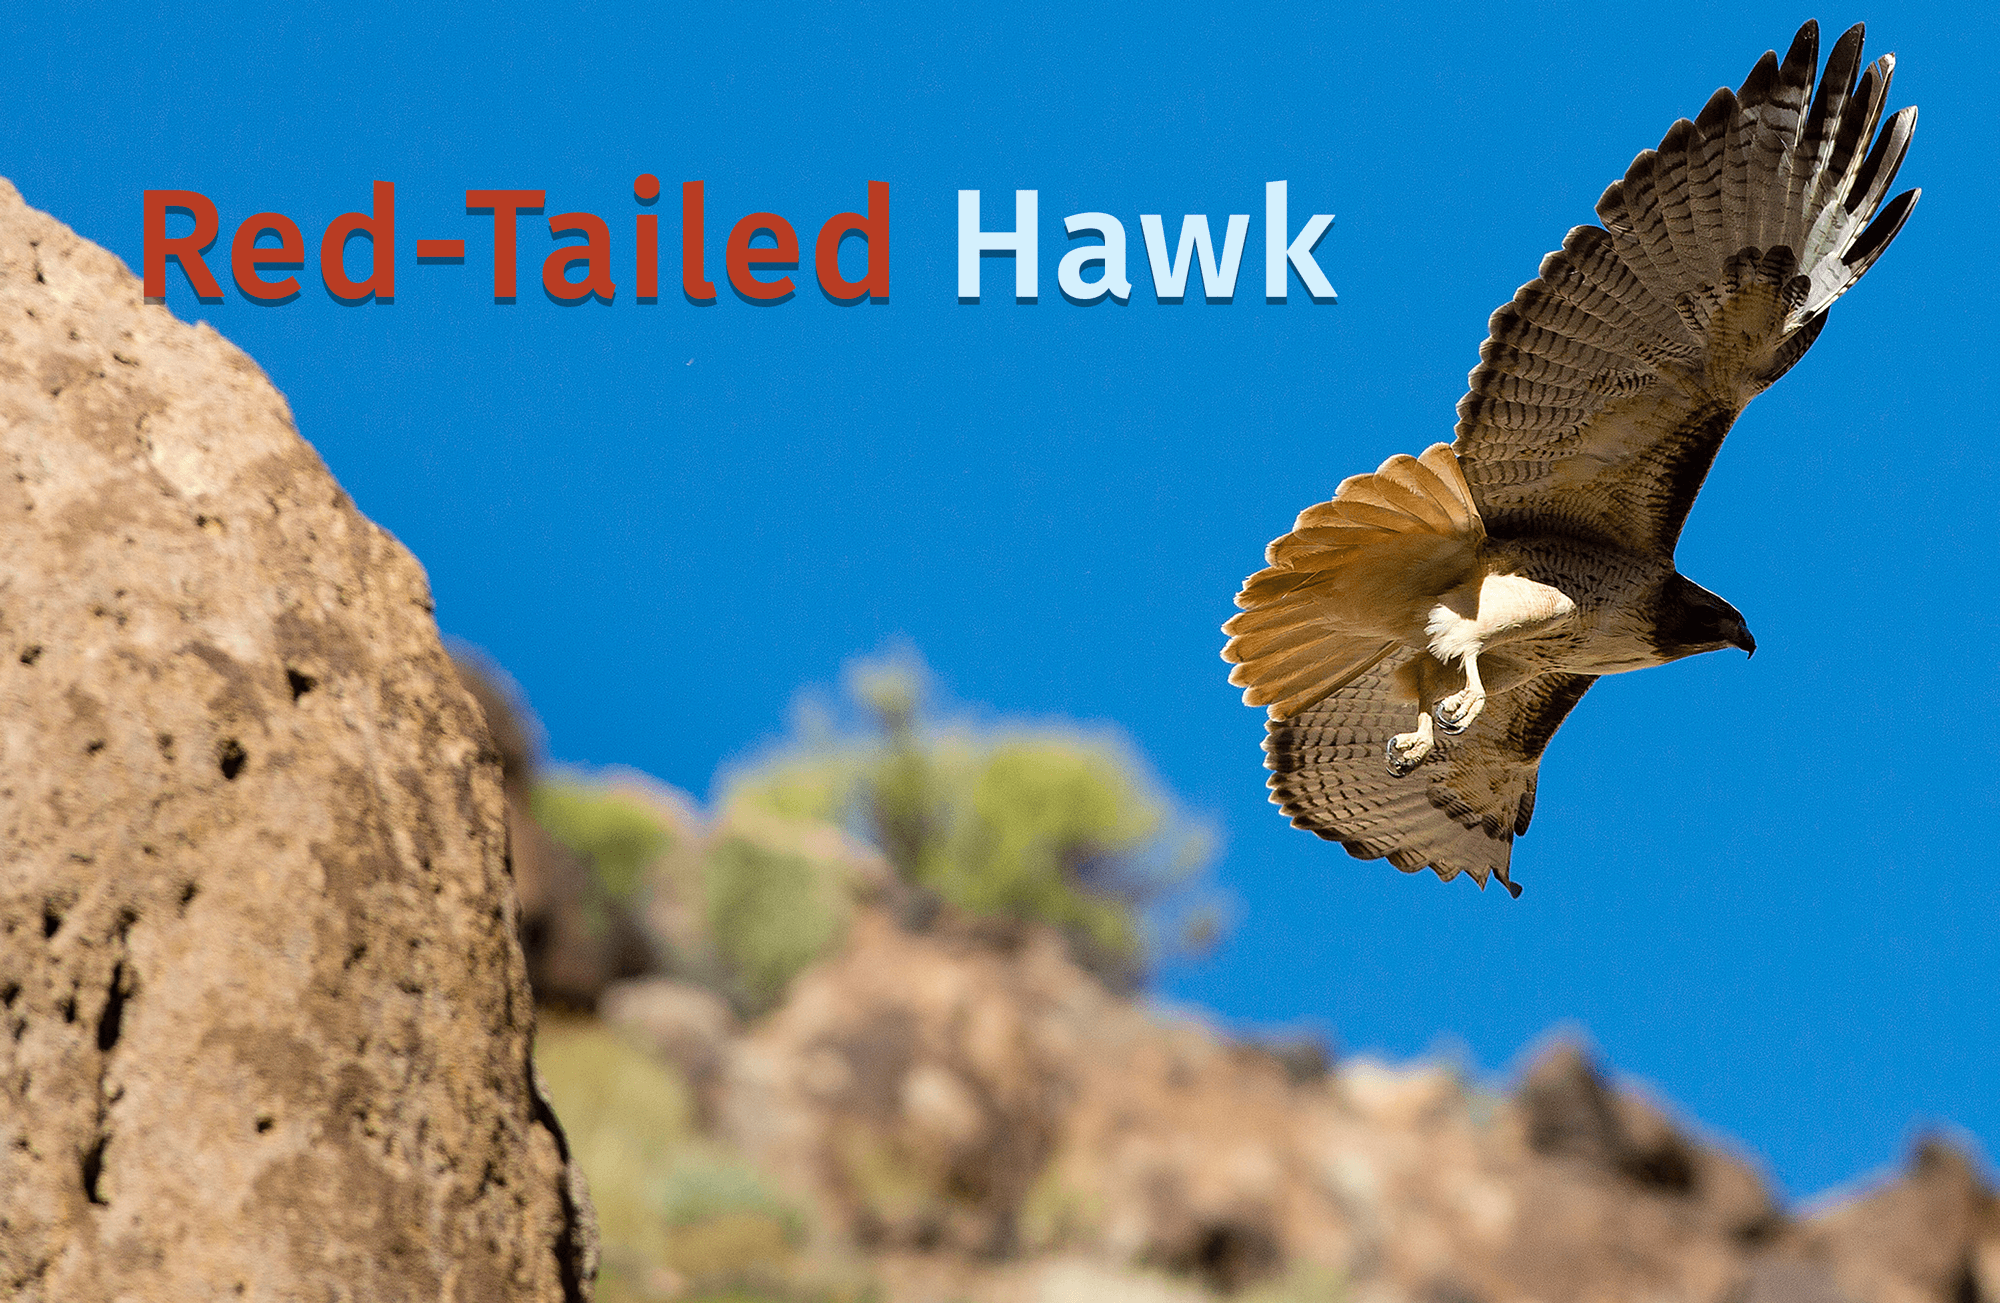 a Red-Tailed Hawk flys to the right of some canyon boulders against a blue sky with the words Red-Tailed Hawk written over the photo.